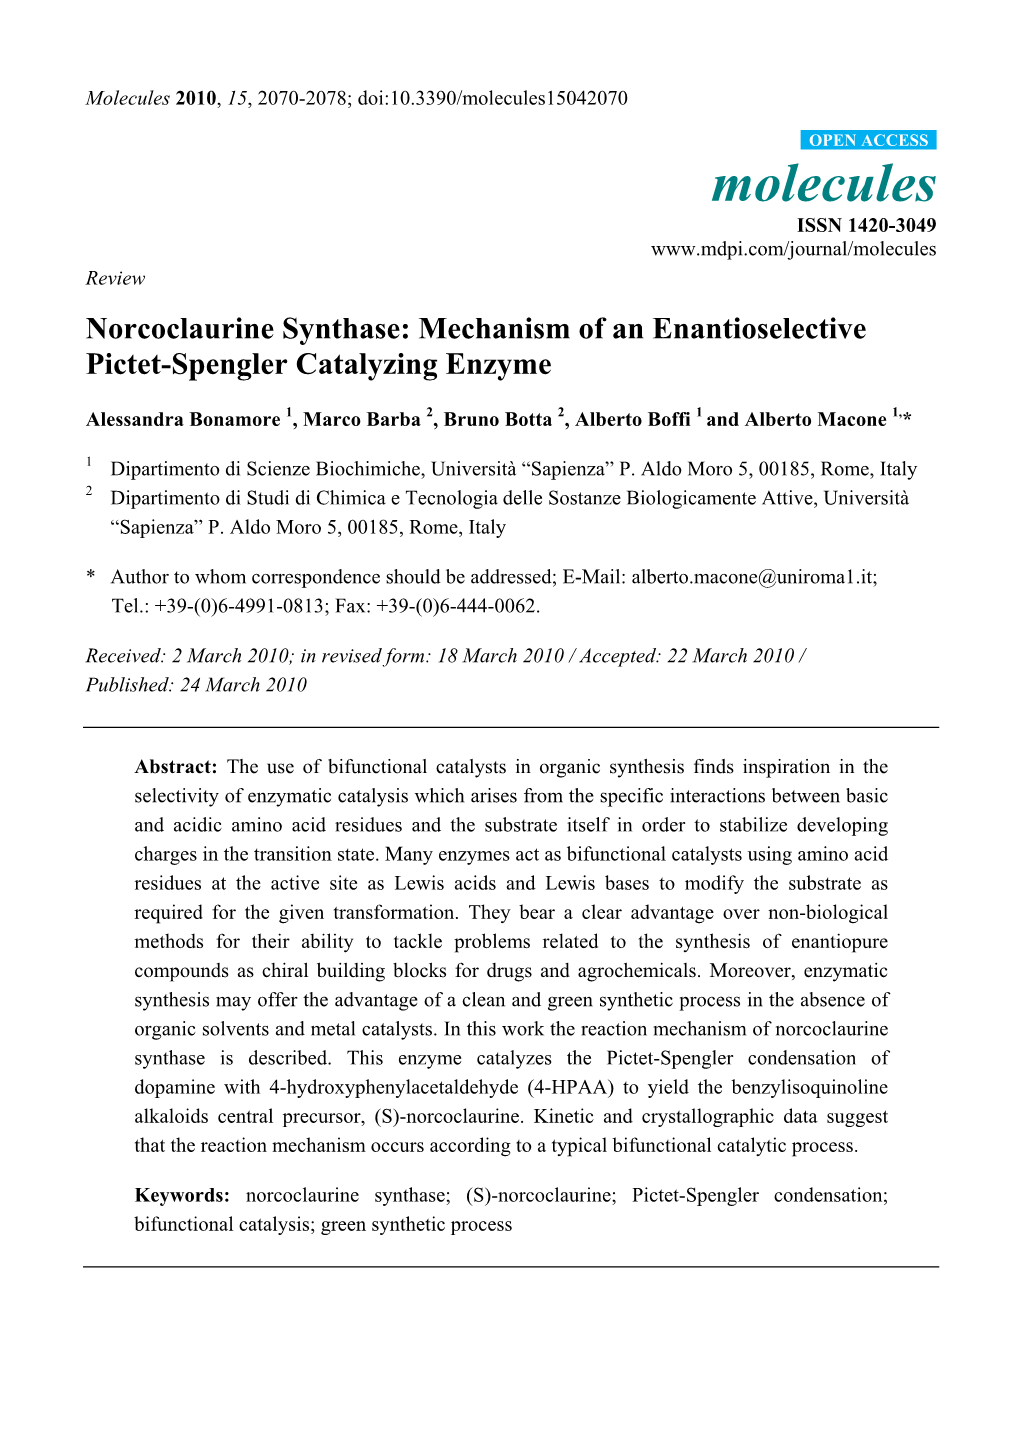 Norcoclaurine Synthase: Mechanism of an Enantioselective Pictet-Spengler Catalyzing Enzyme